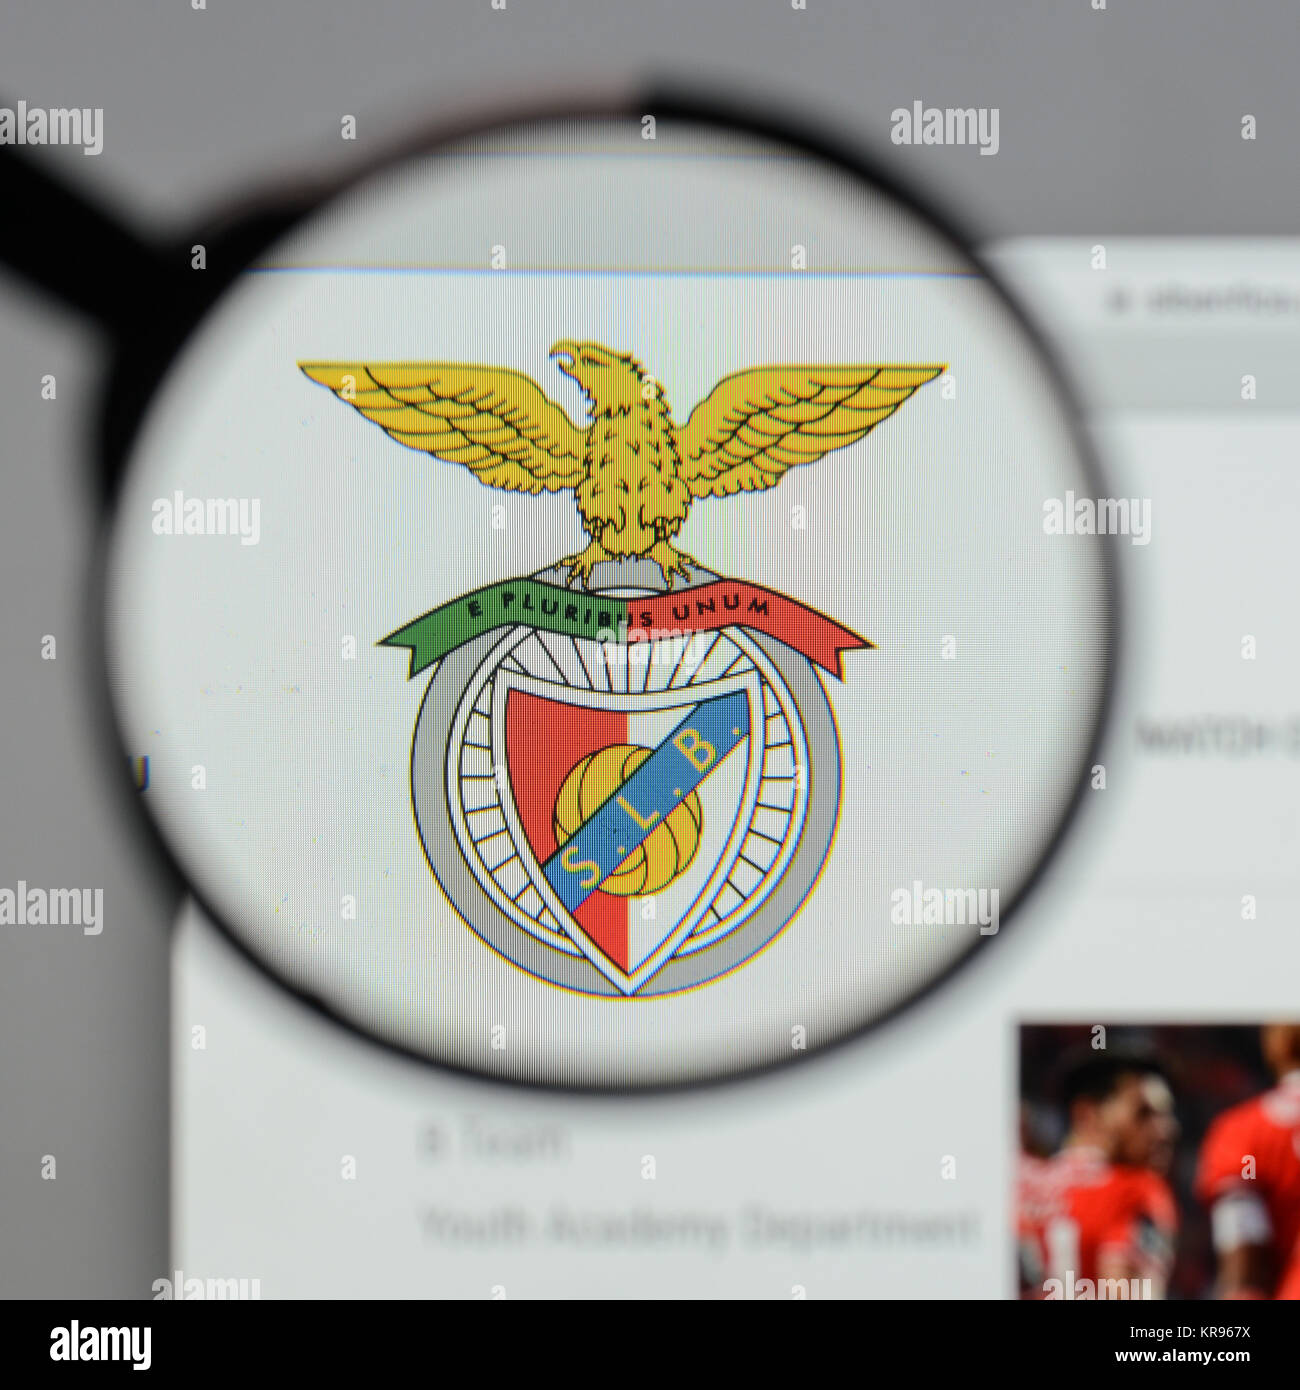 Milan, Italy - August 10, 2017: Benfica Lisbona logo on the website homepage. Stock Photo